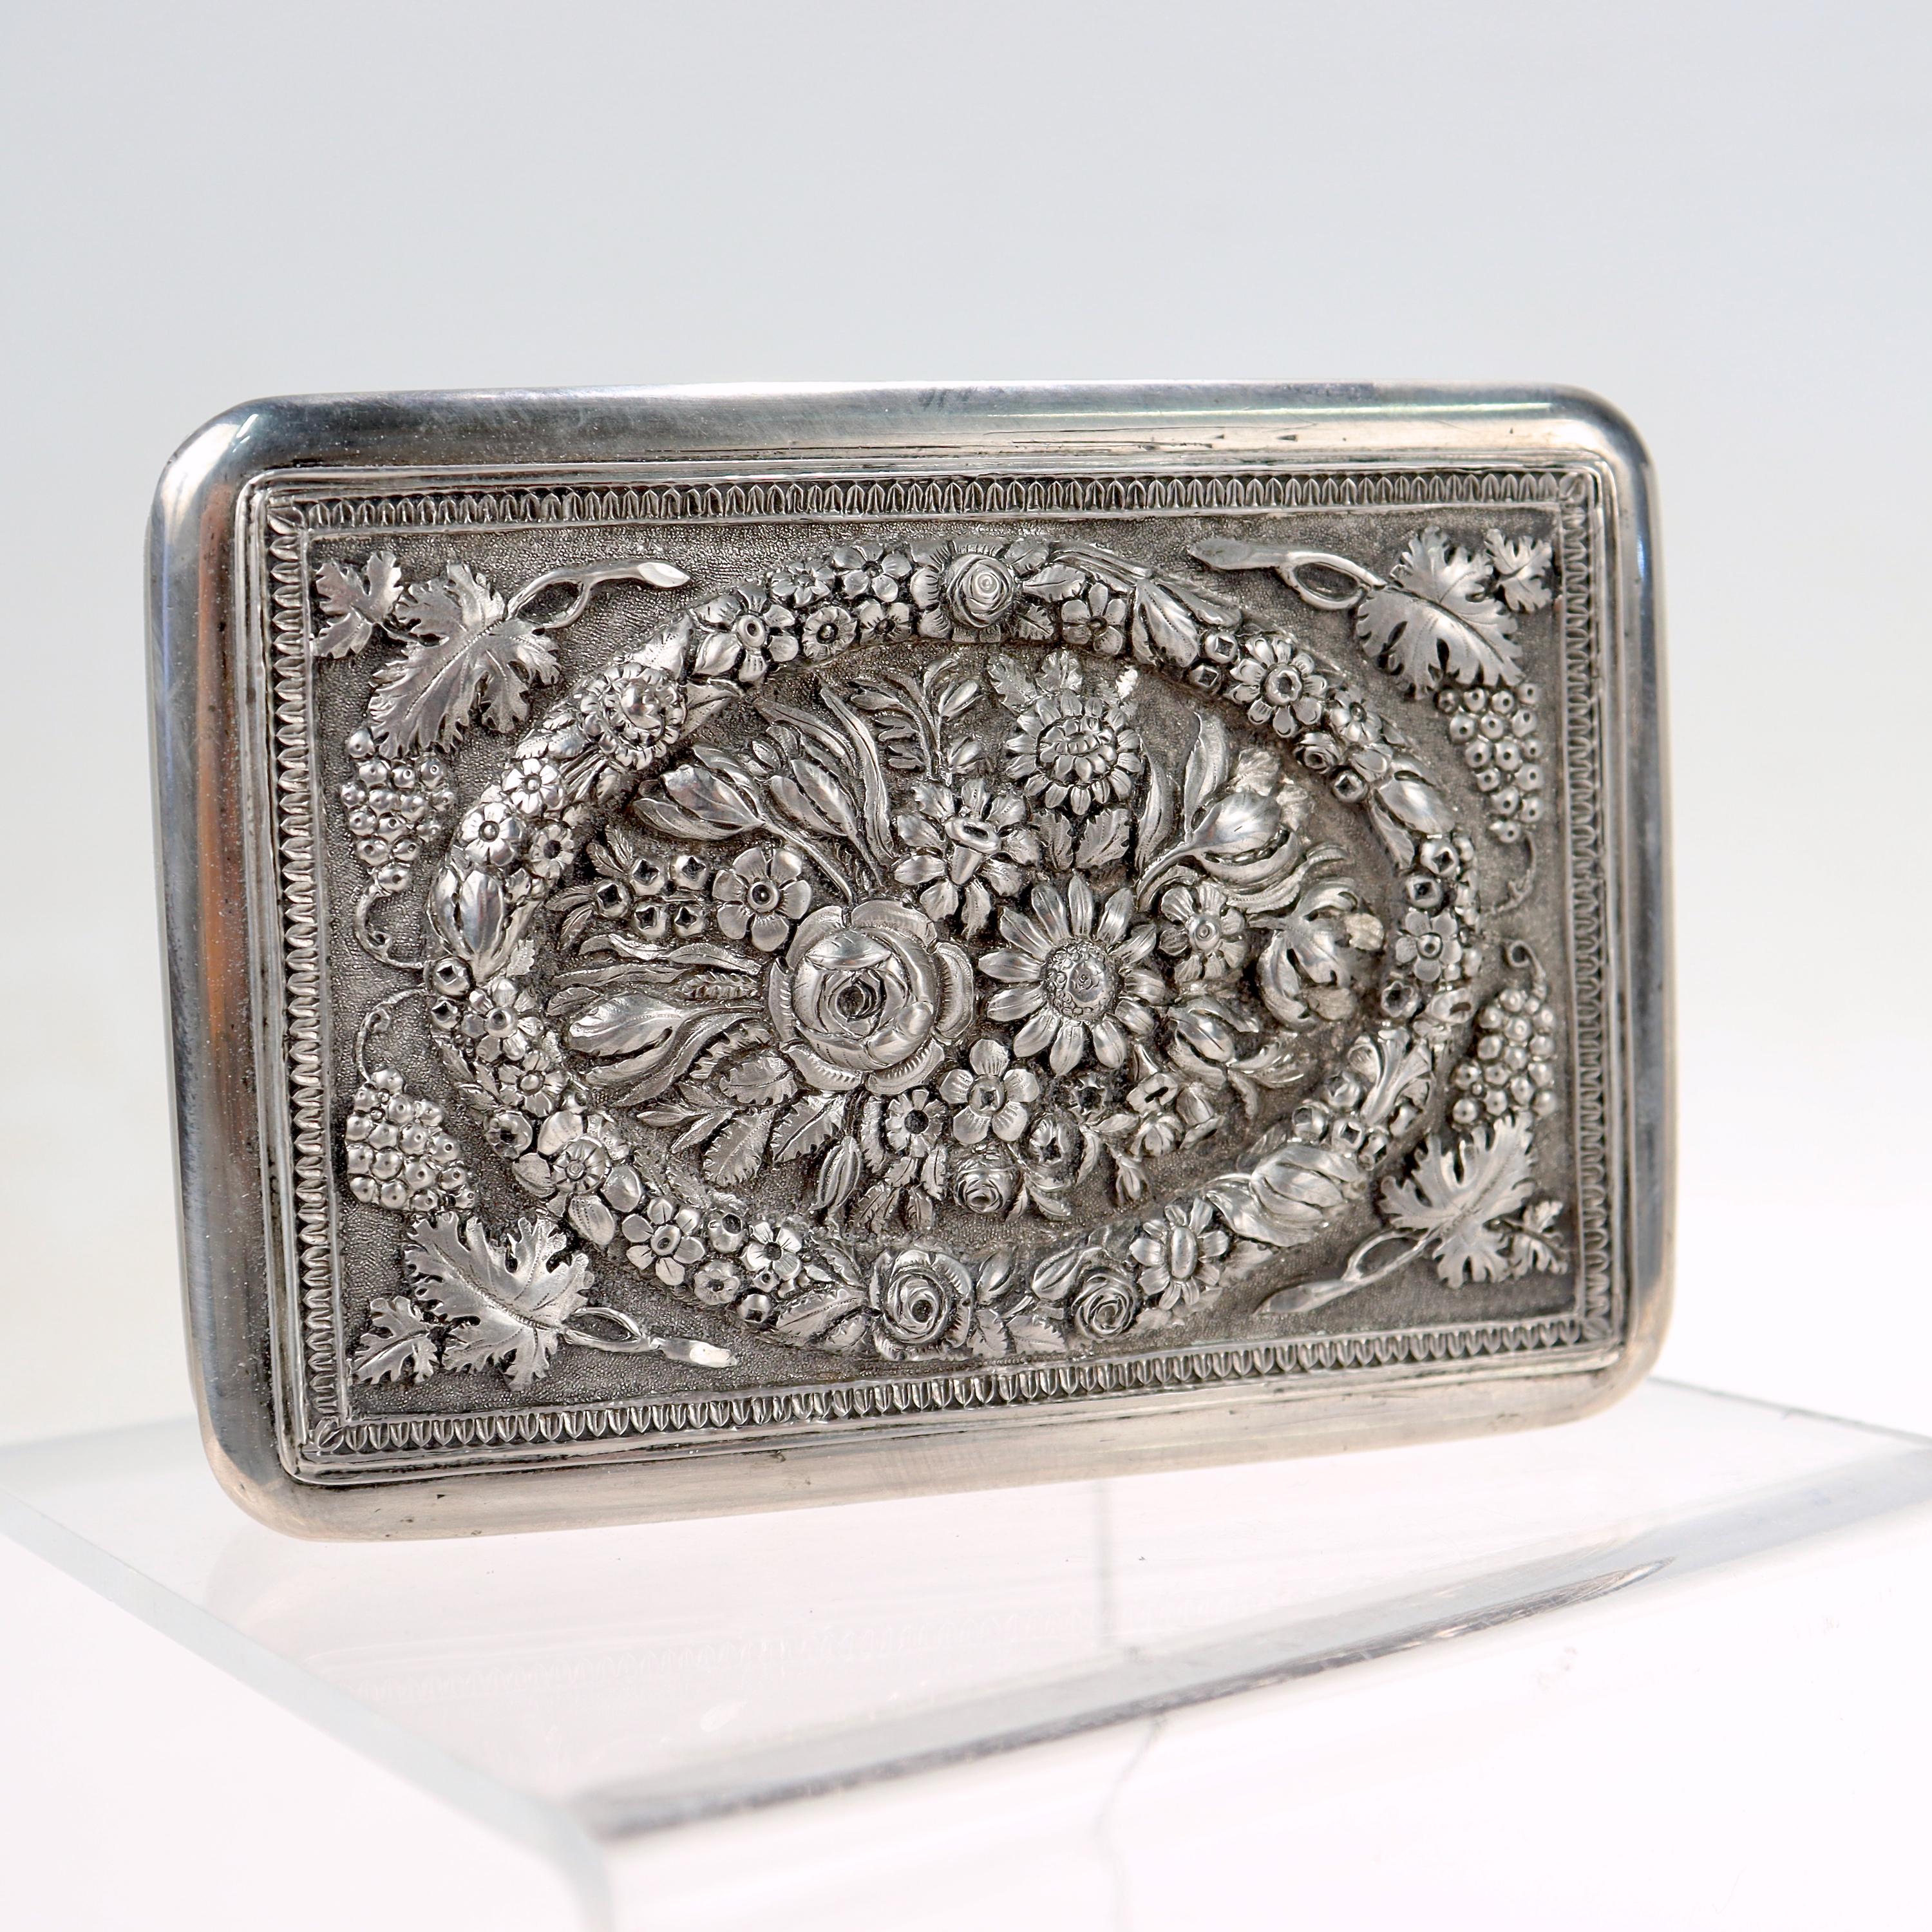 A fine antique silver card case or snuff box.

With repousse floral motifs to the lid and a gold washed interior. 

There is an Austrian silver assay mark for 13 Loth, Vienna, and 18_7 (1807-1857), along with a maker's mark 'GS'. 

Simply a lovely